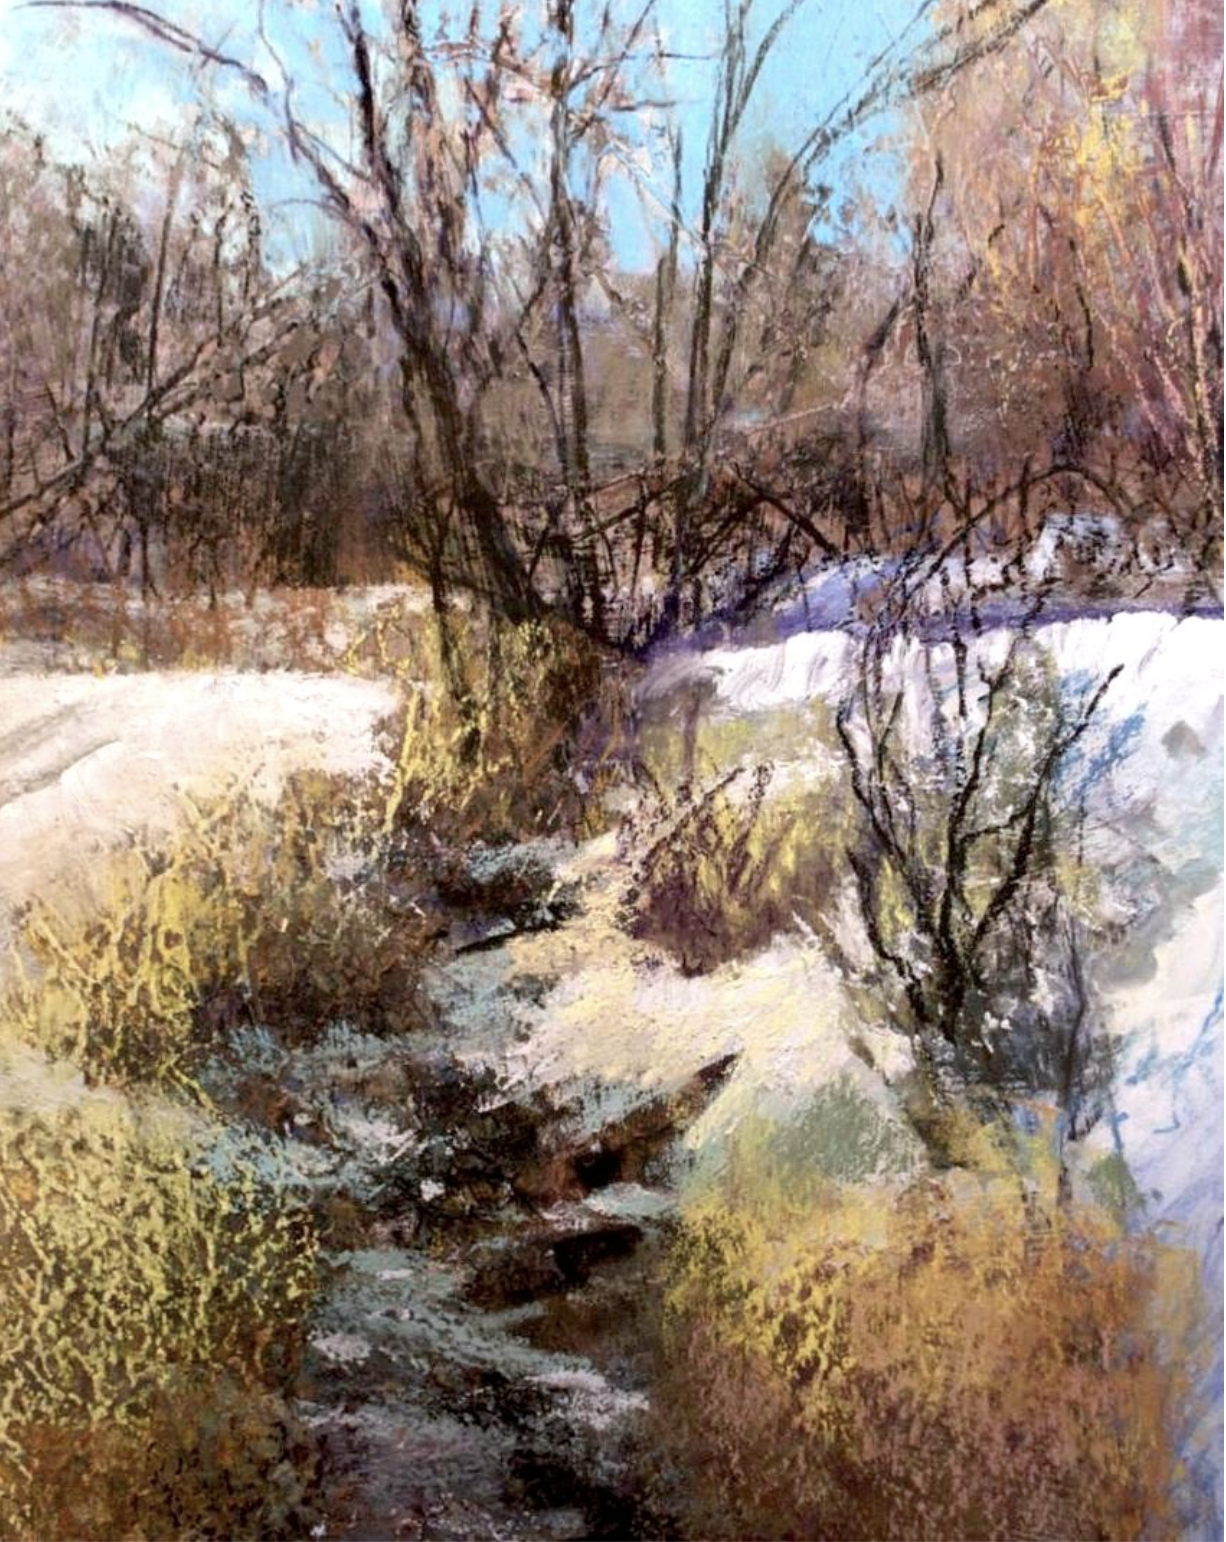 Painting snow - Tom Christopher, "Winter Waterway," pastel, no size given. HM in Dakota Art Pastels Q4 Established Artist category